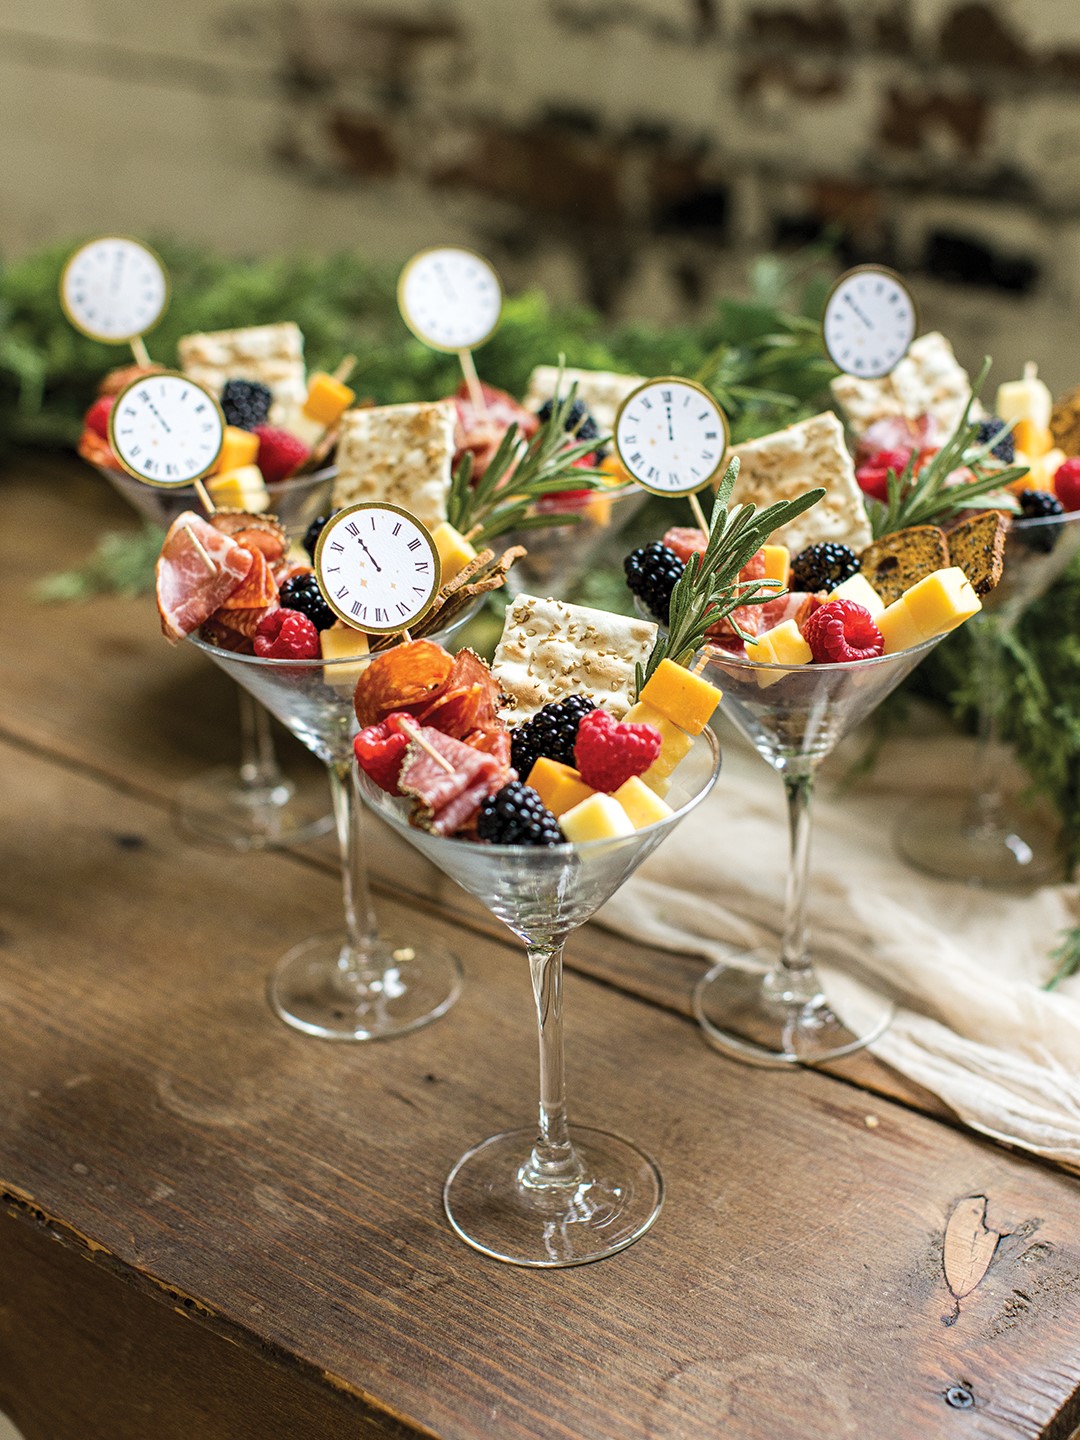 Easy-to-handle charcuterie cups using martini glasses.